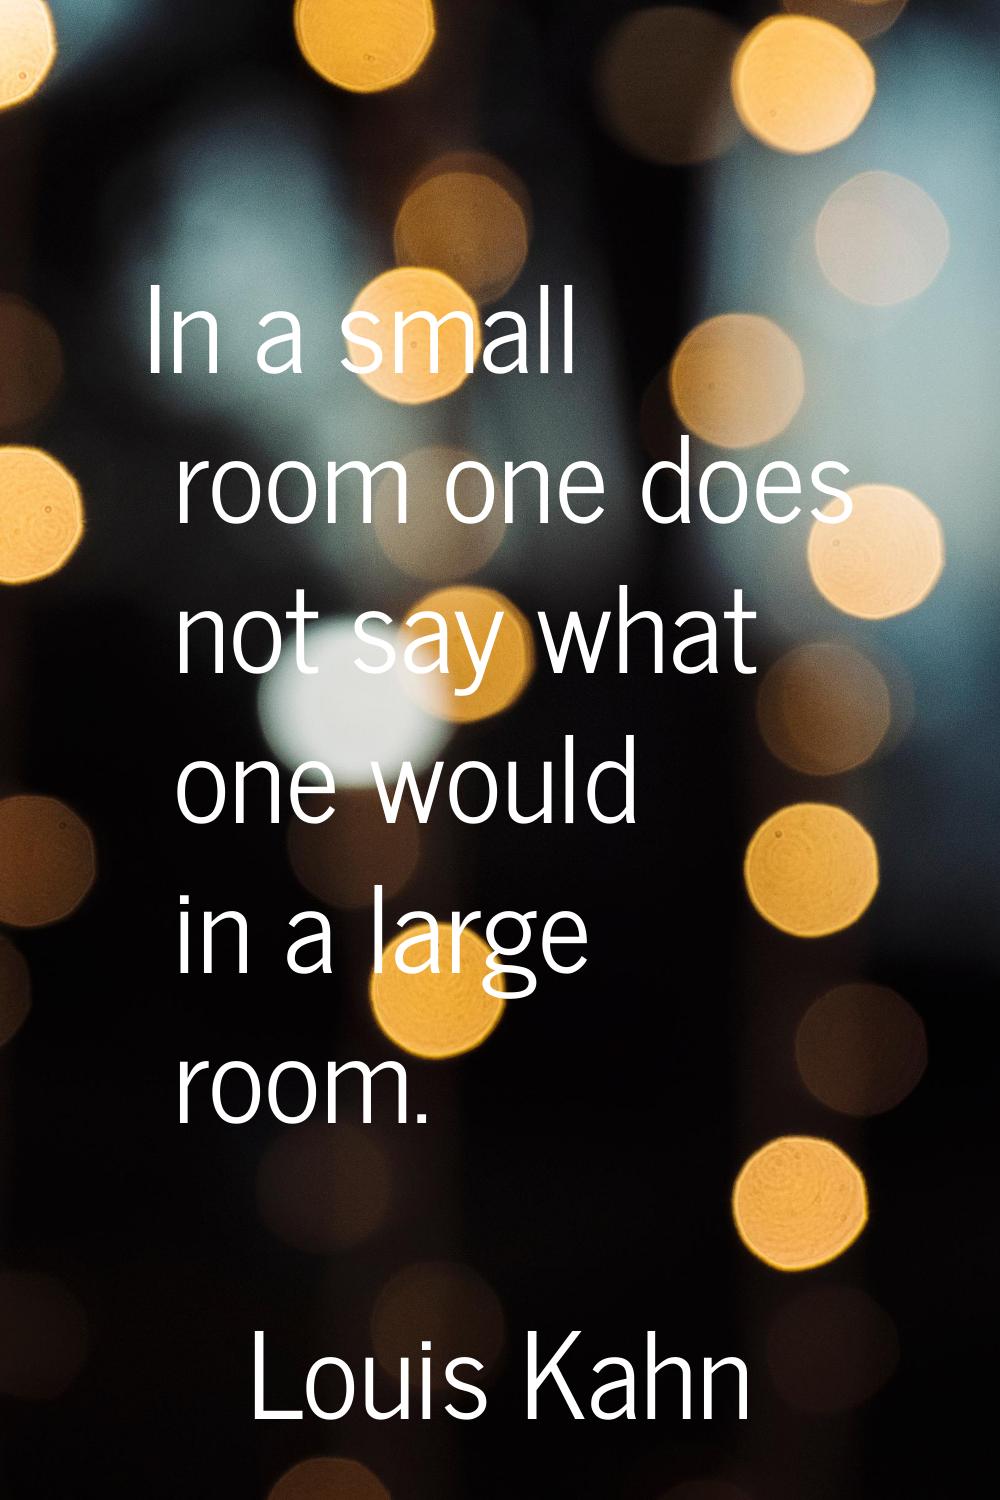 In a small room one does not say what one would in a large room.